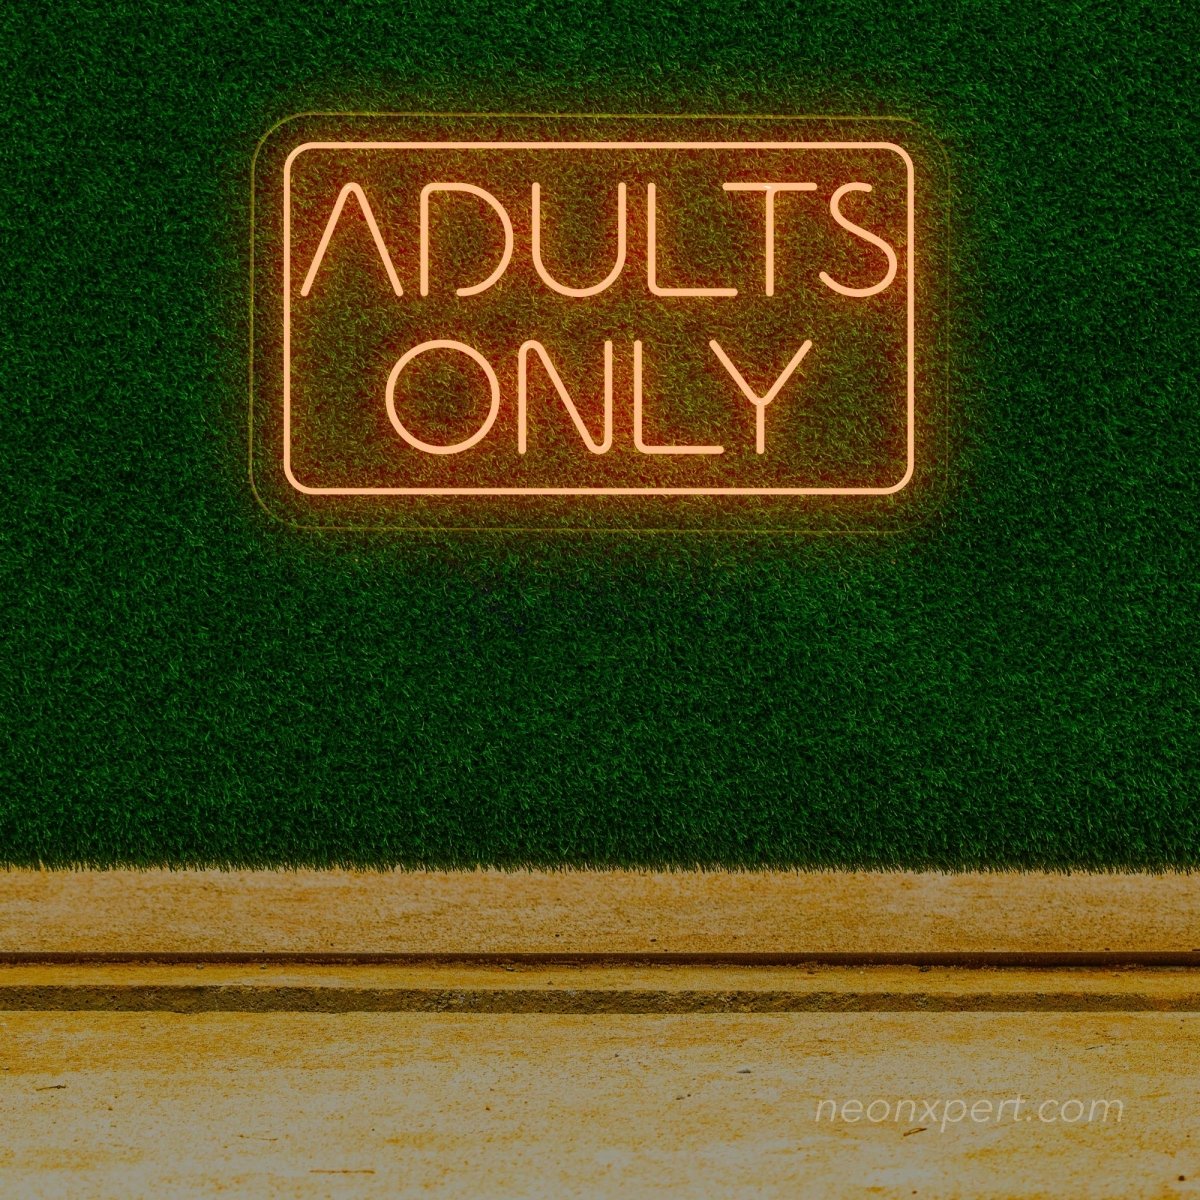 Adults Only Neon Sign | LED Neon Light - NeonXpert